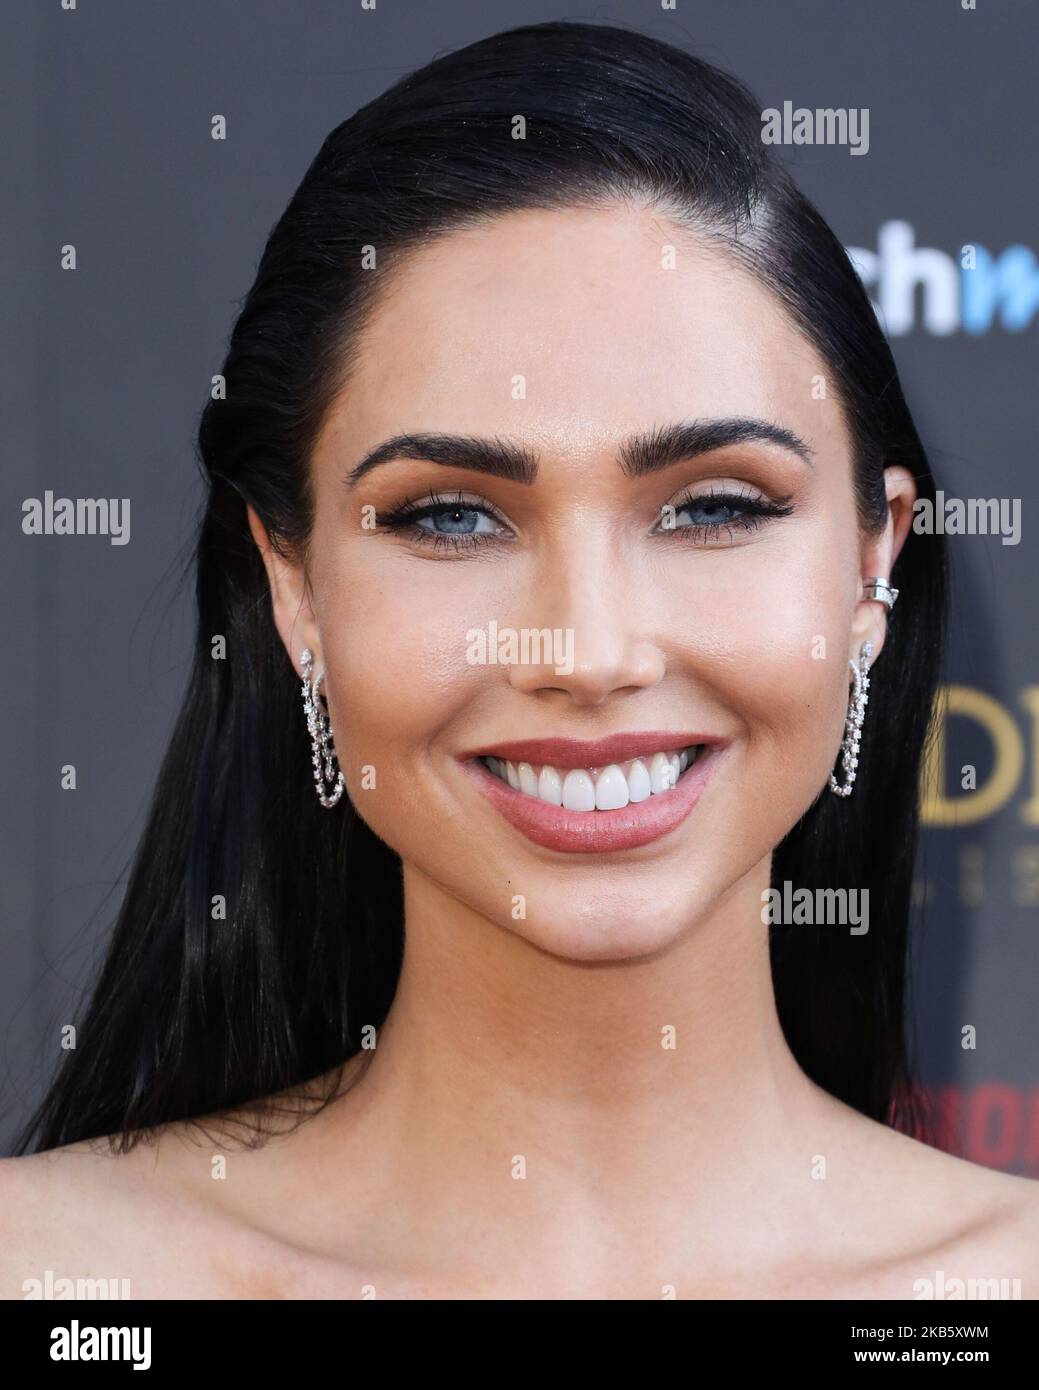 HOLLYWOOD, LOS ANGELES, CALIFORNIA, USA - SEPTEMBER 13: Jessica Green arrives at the 45th Annual Saturn Awards held at Avalon Hollywood on September 13, 2019 in Hollywood, Los Angeles, California, United States. (Photo by David Acosta/Image Press Agency/NurPhoto) Stock Photo